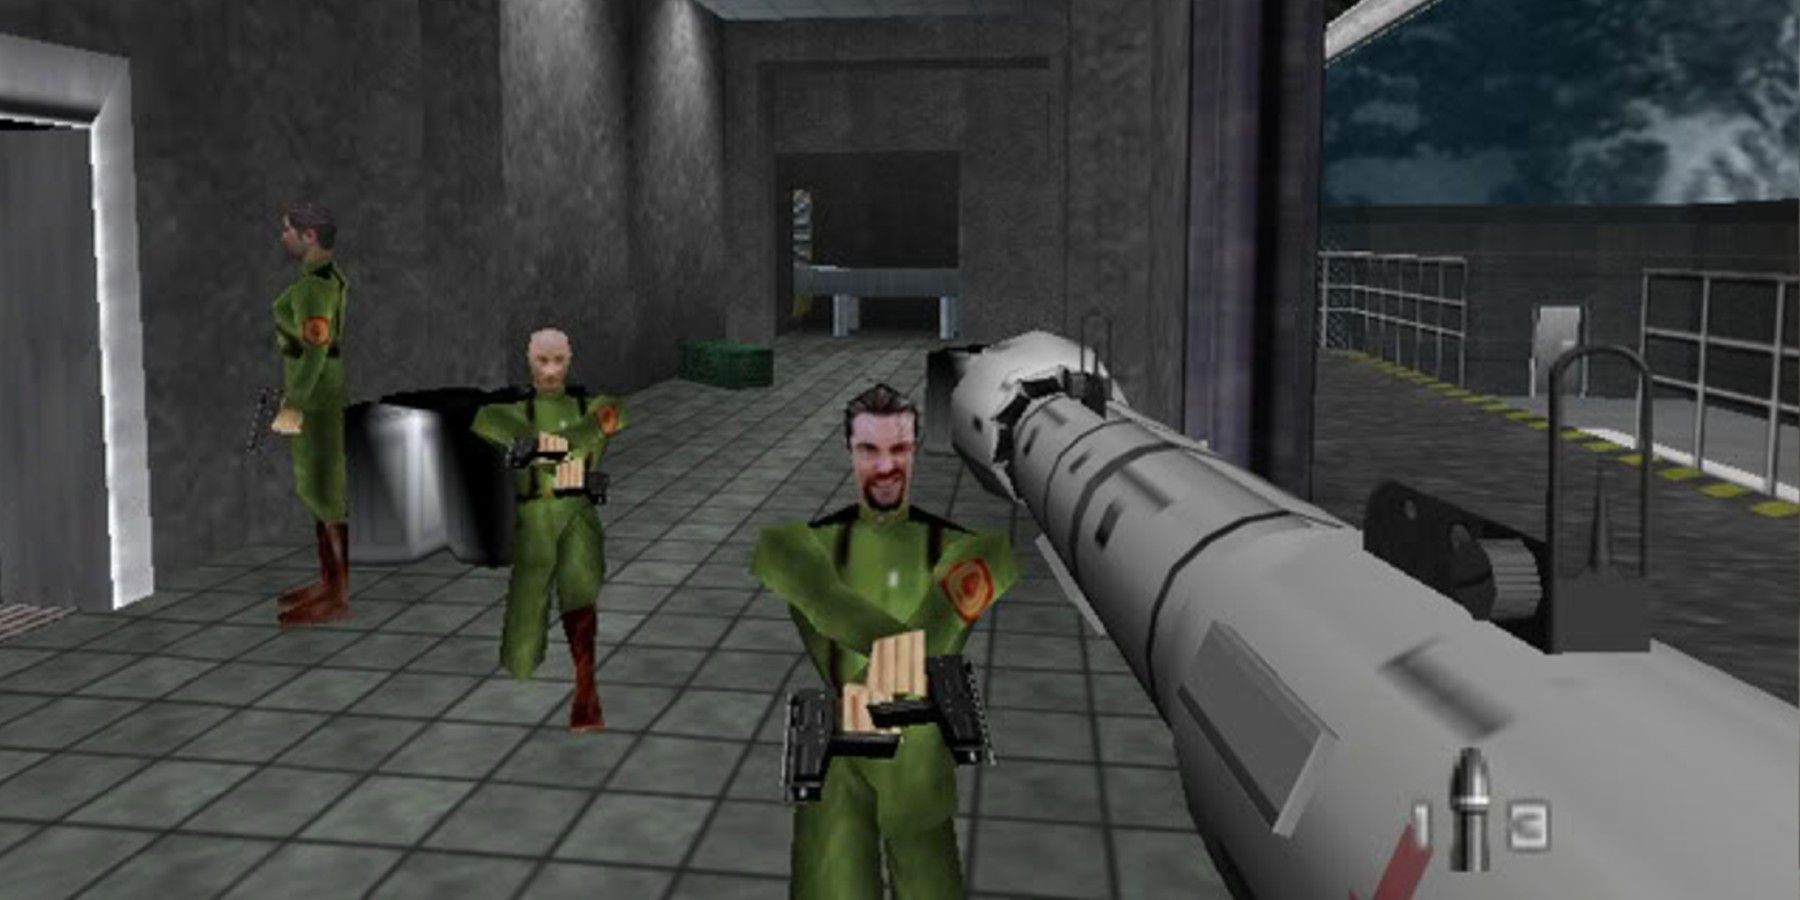 Play Nintendo DS GoldenEye 007 (France) Online in your browser 